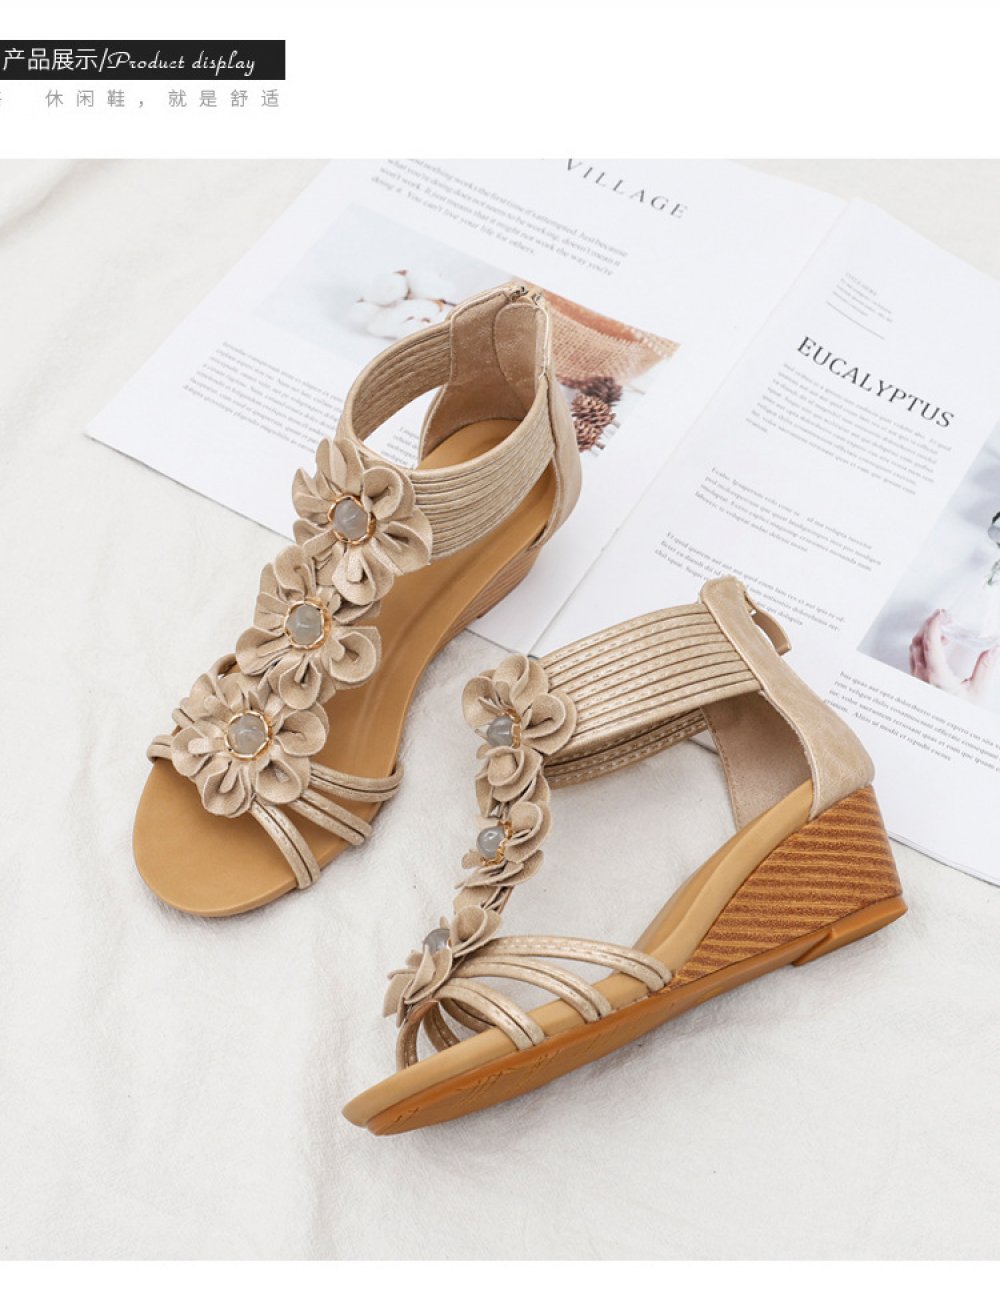 Simian Ethnic Style Sandals Women's Wedge Heels With Thick Soles And Skirts Summer New Flower Roman Shoes Wholesale Women Shoes